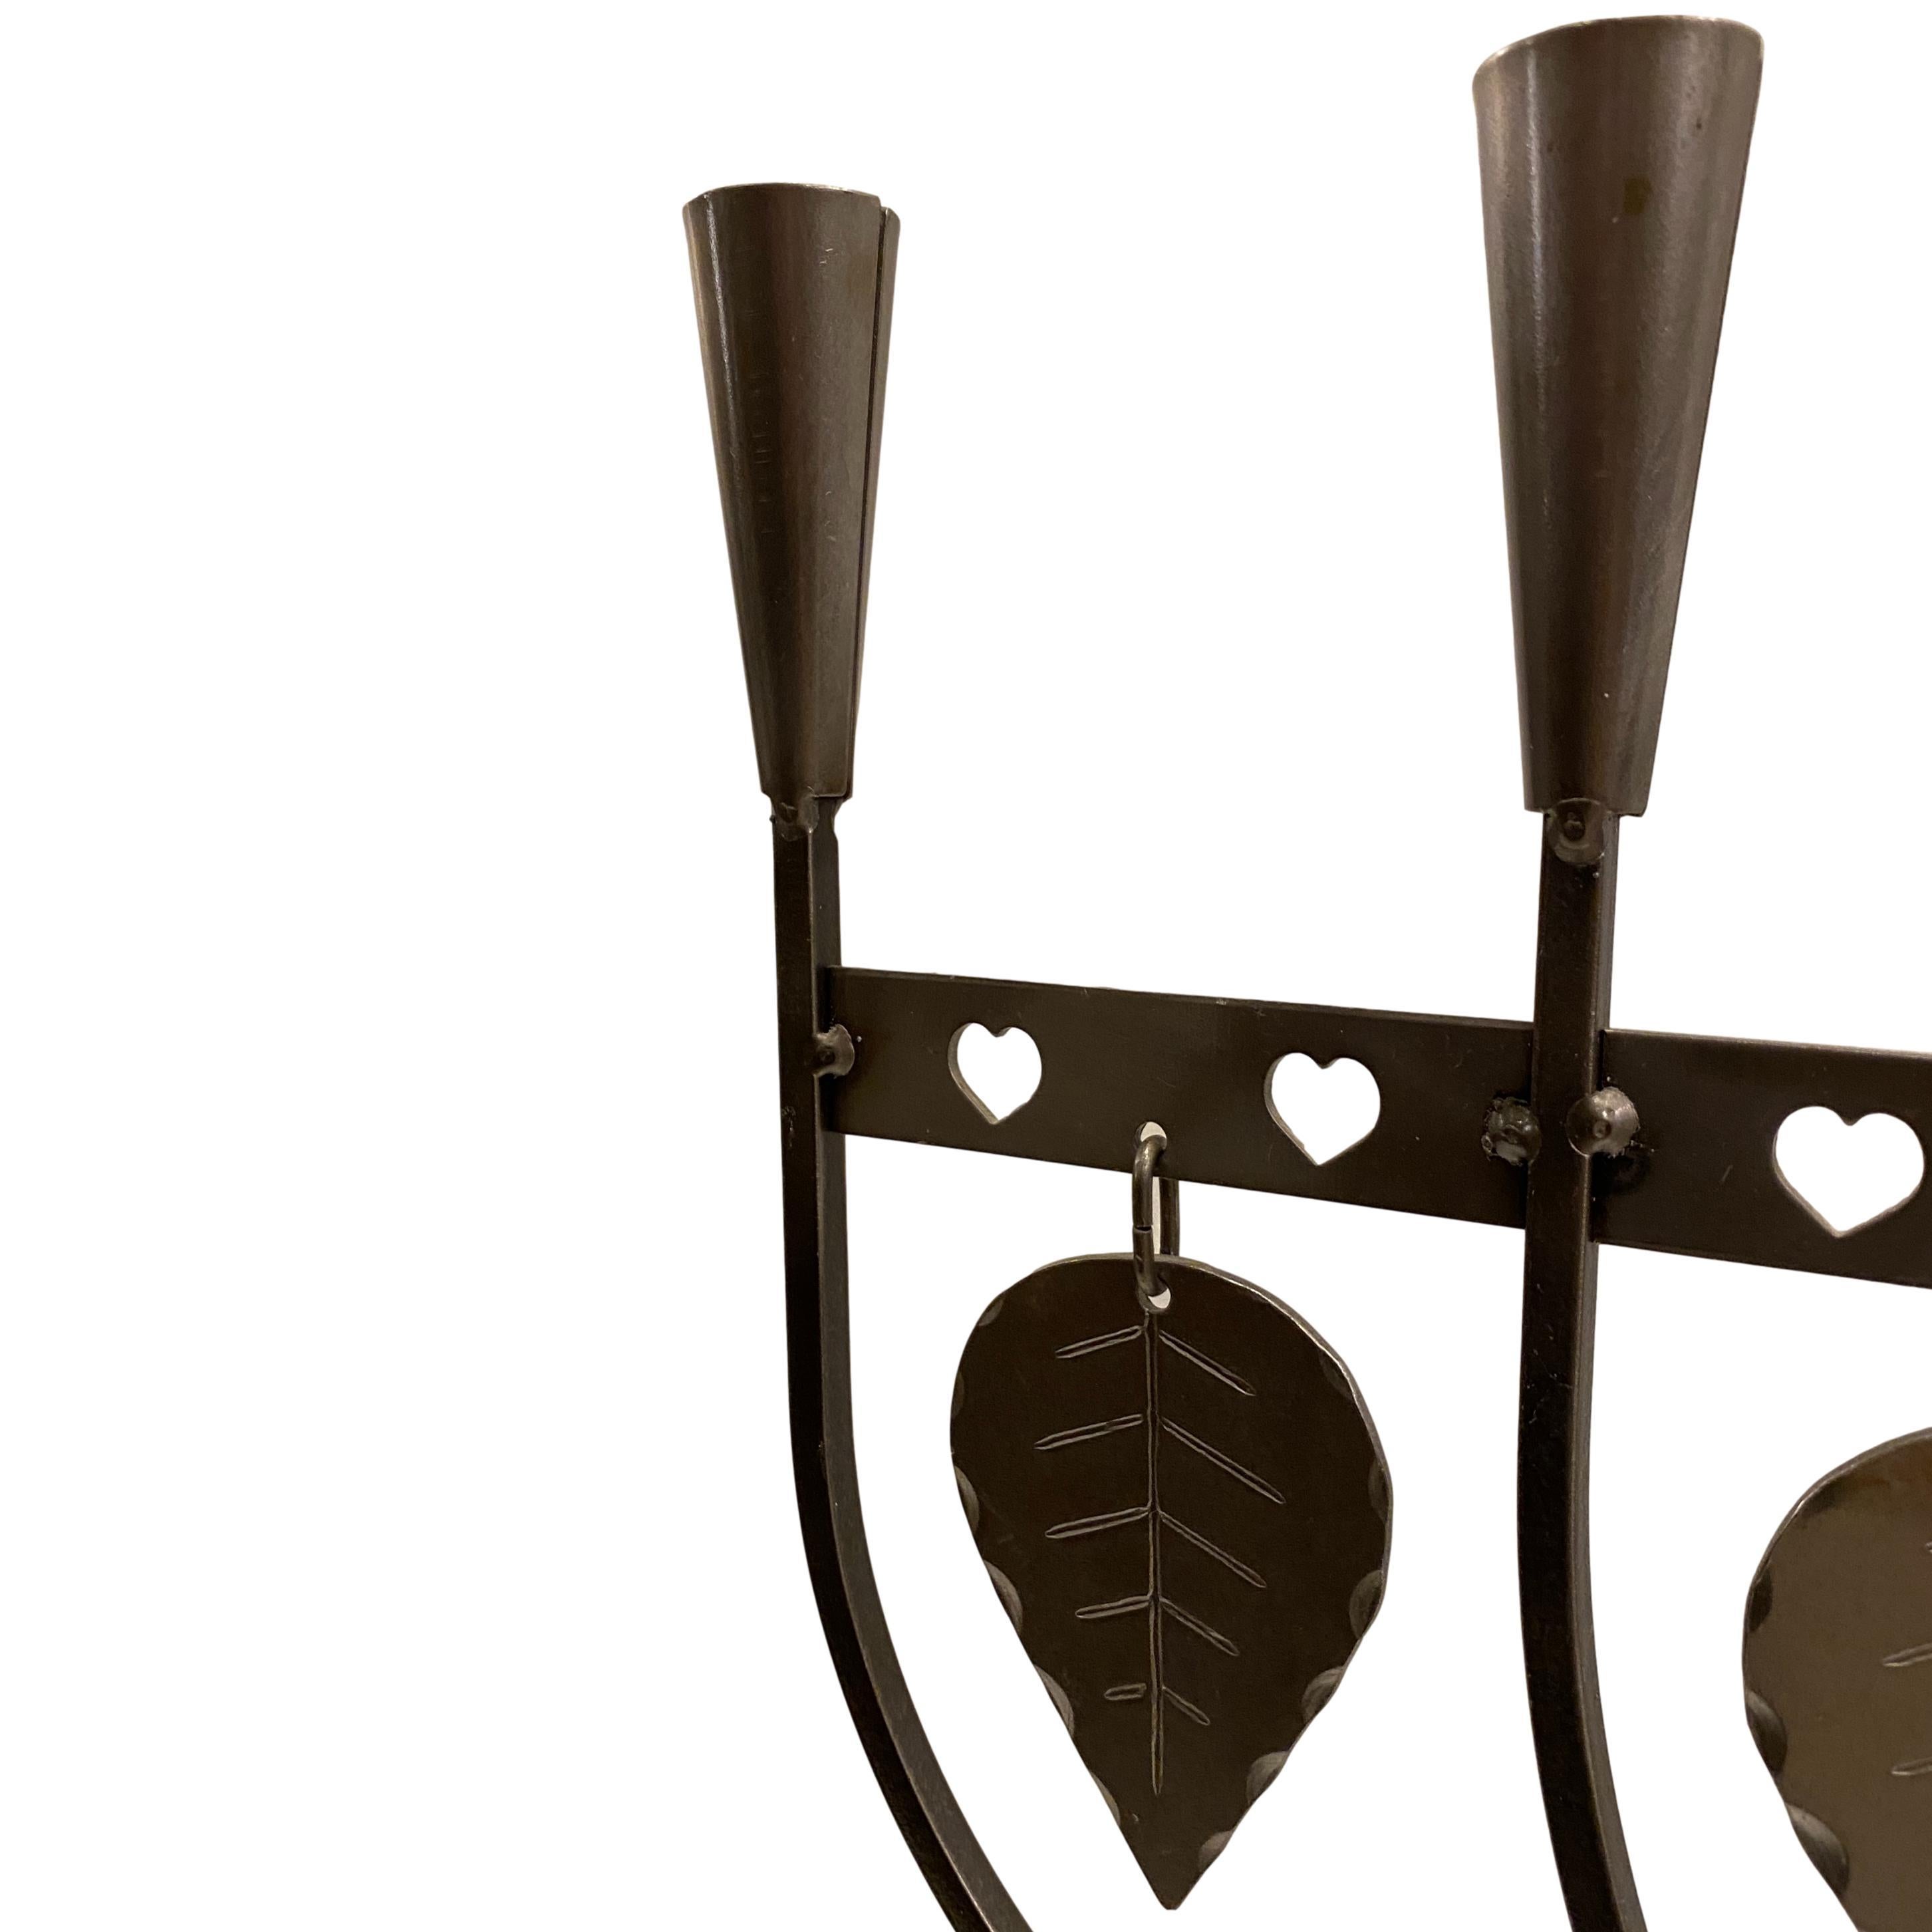 Mid-20th Century Pair of Midcentury Swedish Iron Candelabras For Sale